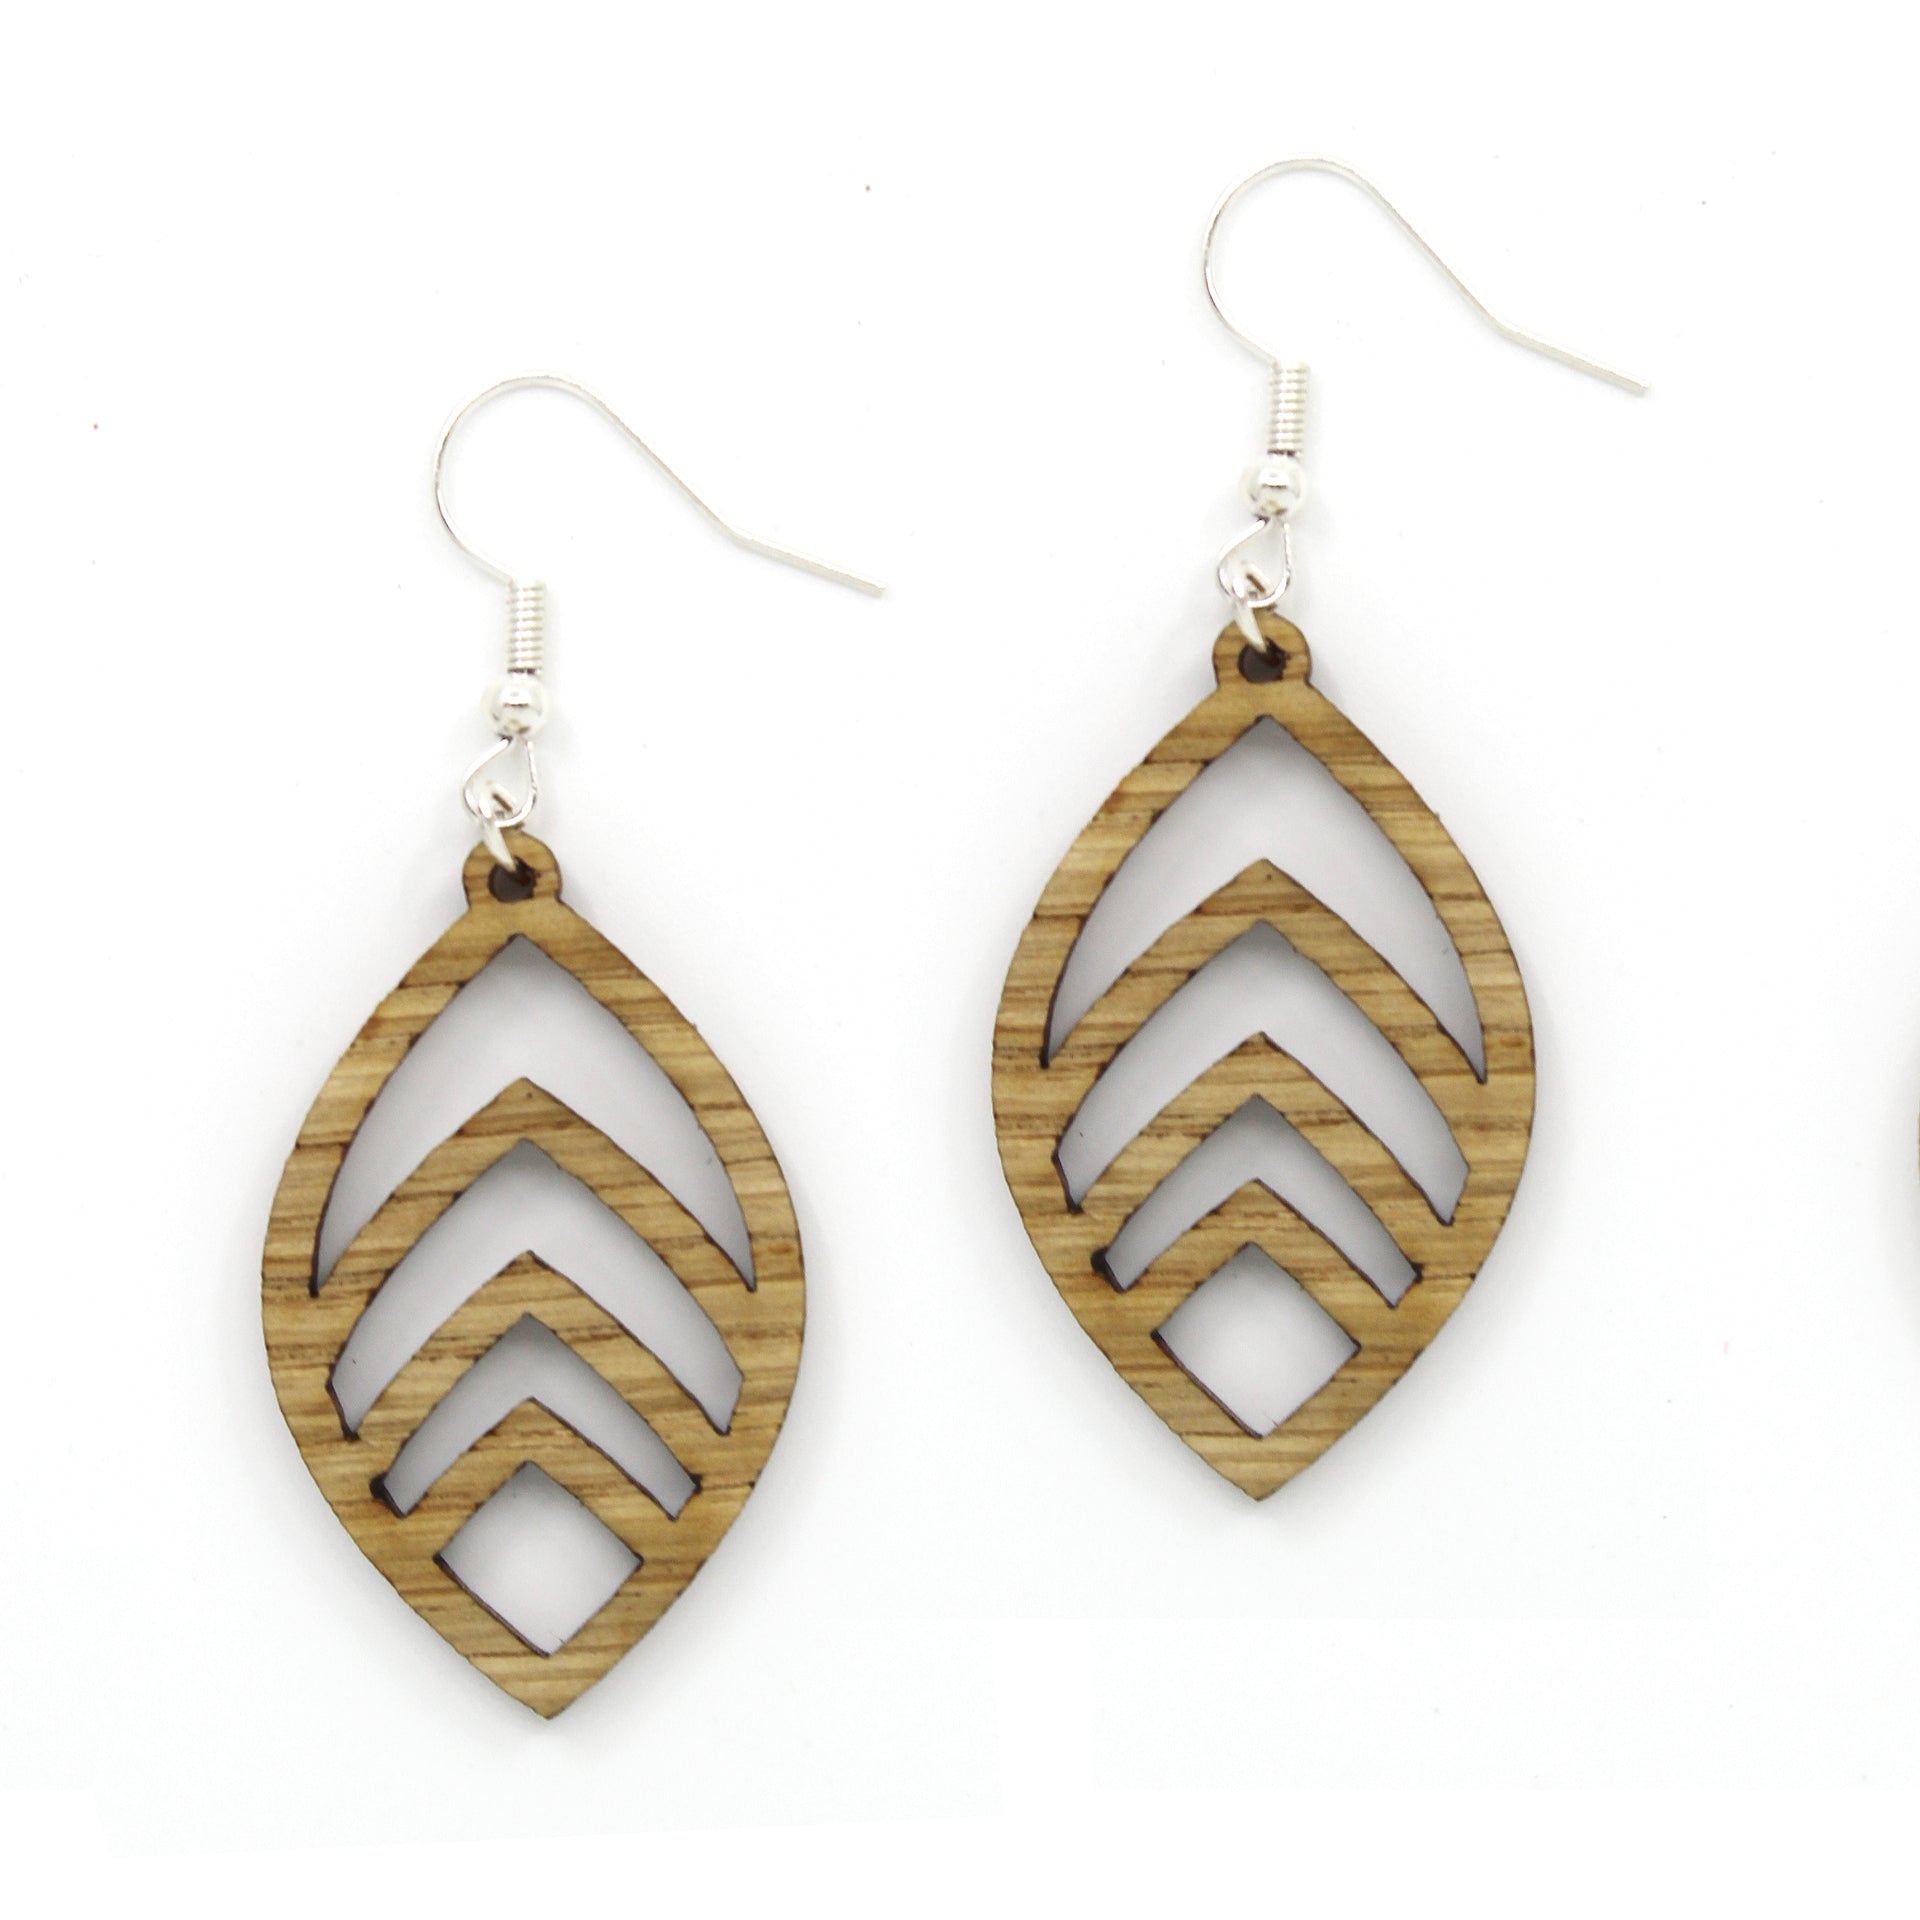 wooden earrings as a gift for any occasion